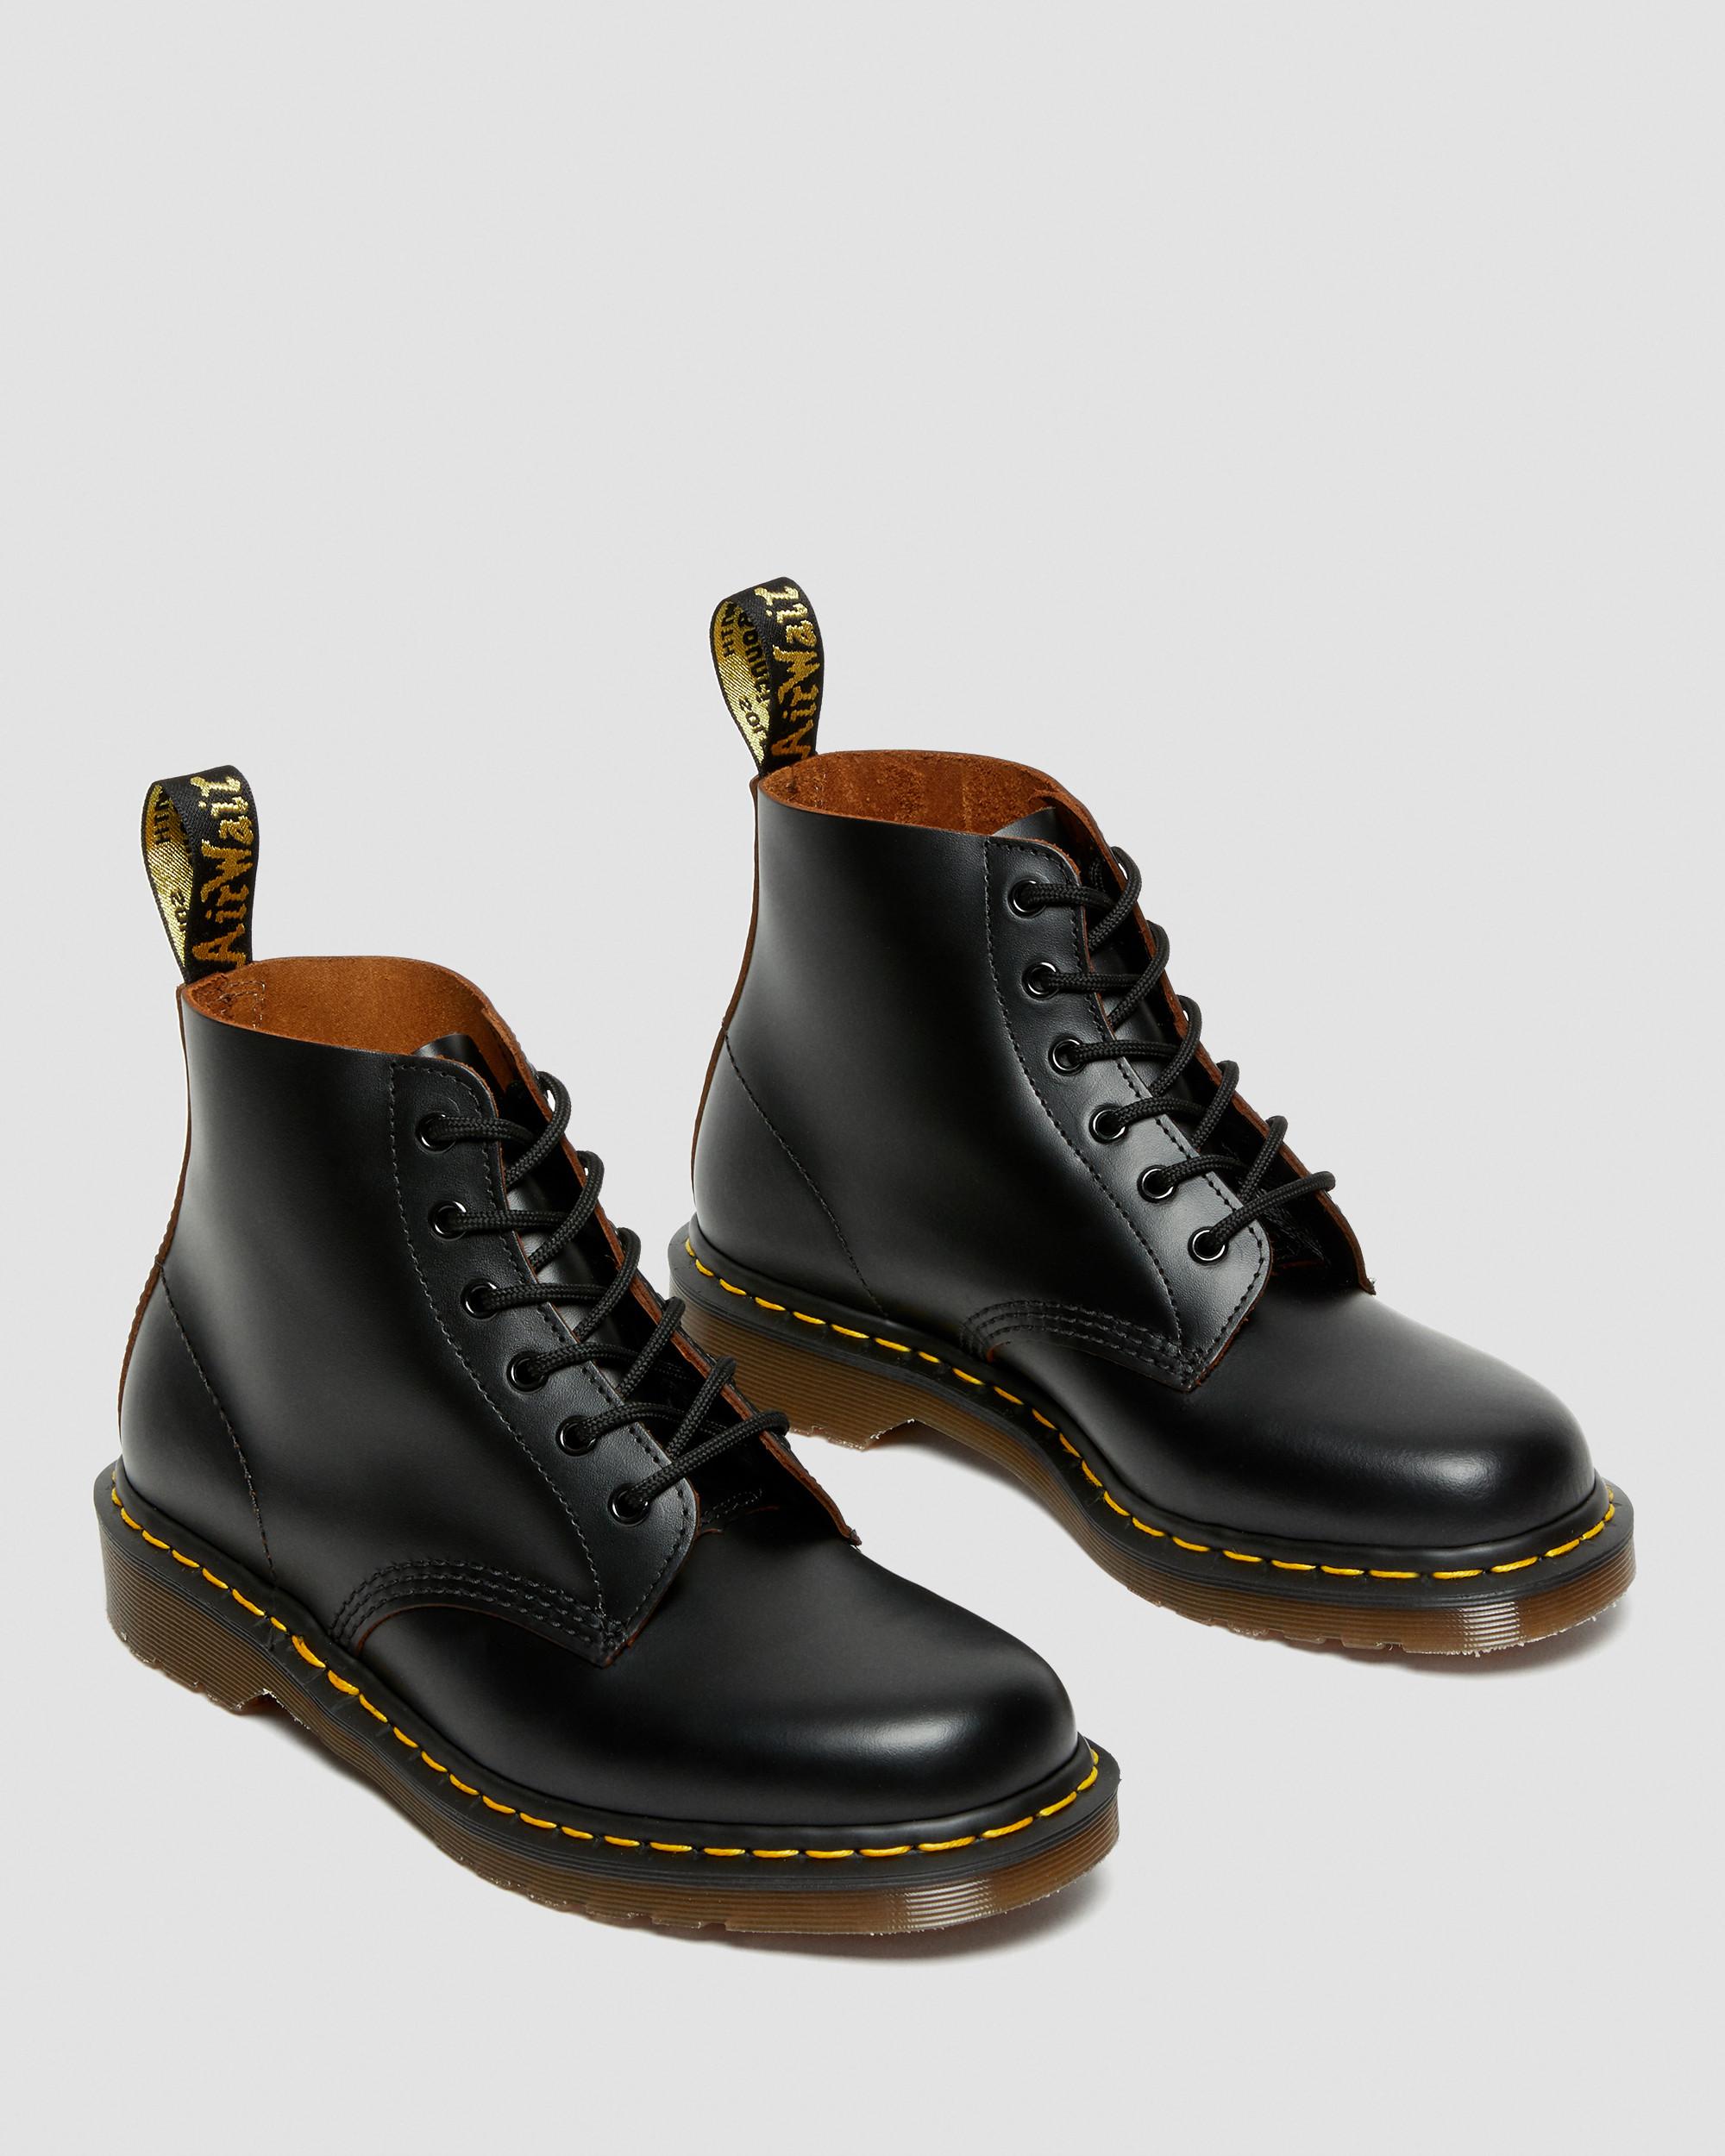 Vintage 101 Leather Ankle BootsVintage 101 Leather Ankle Boots Dr. Martens